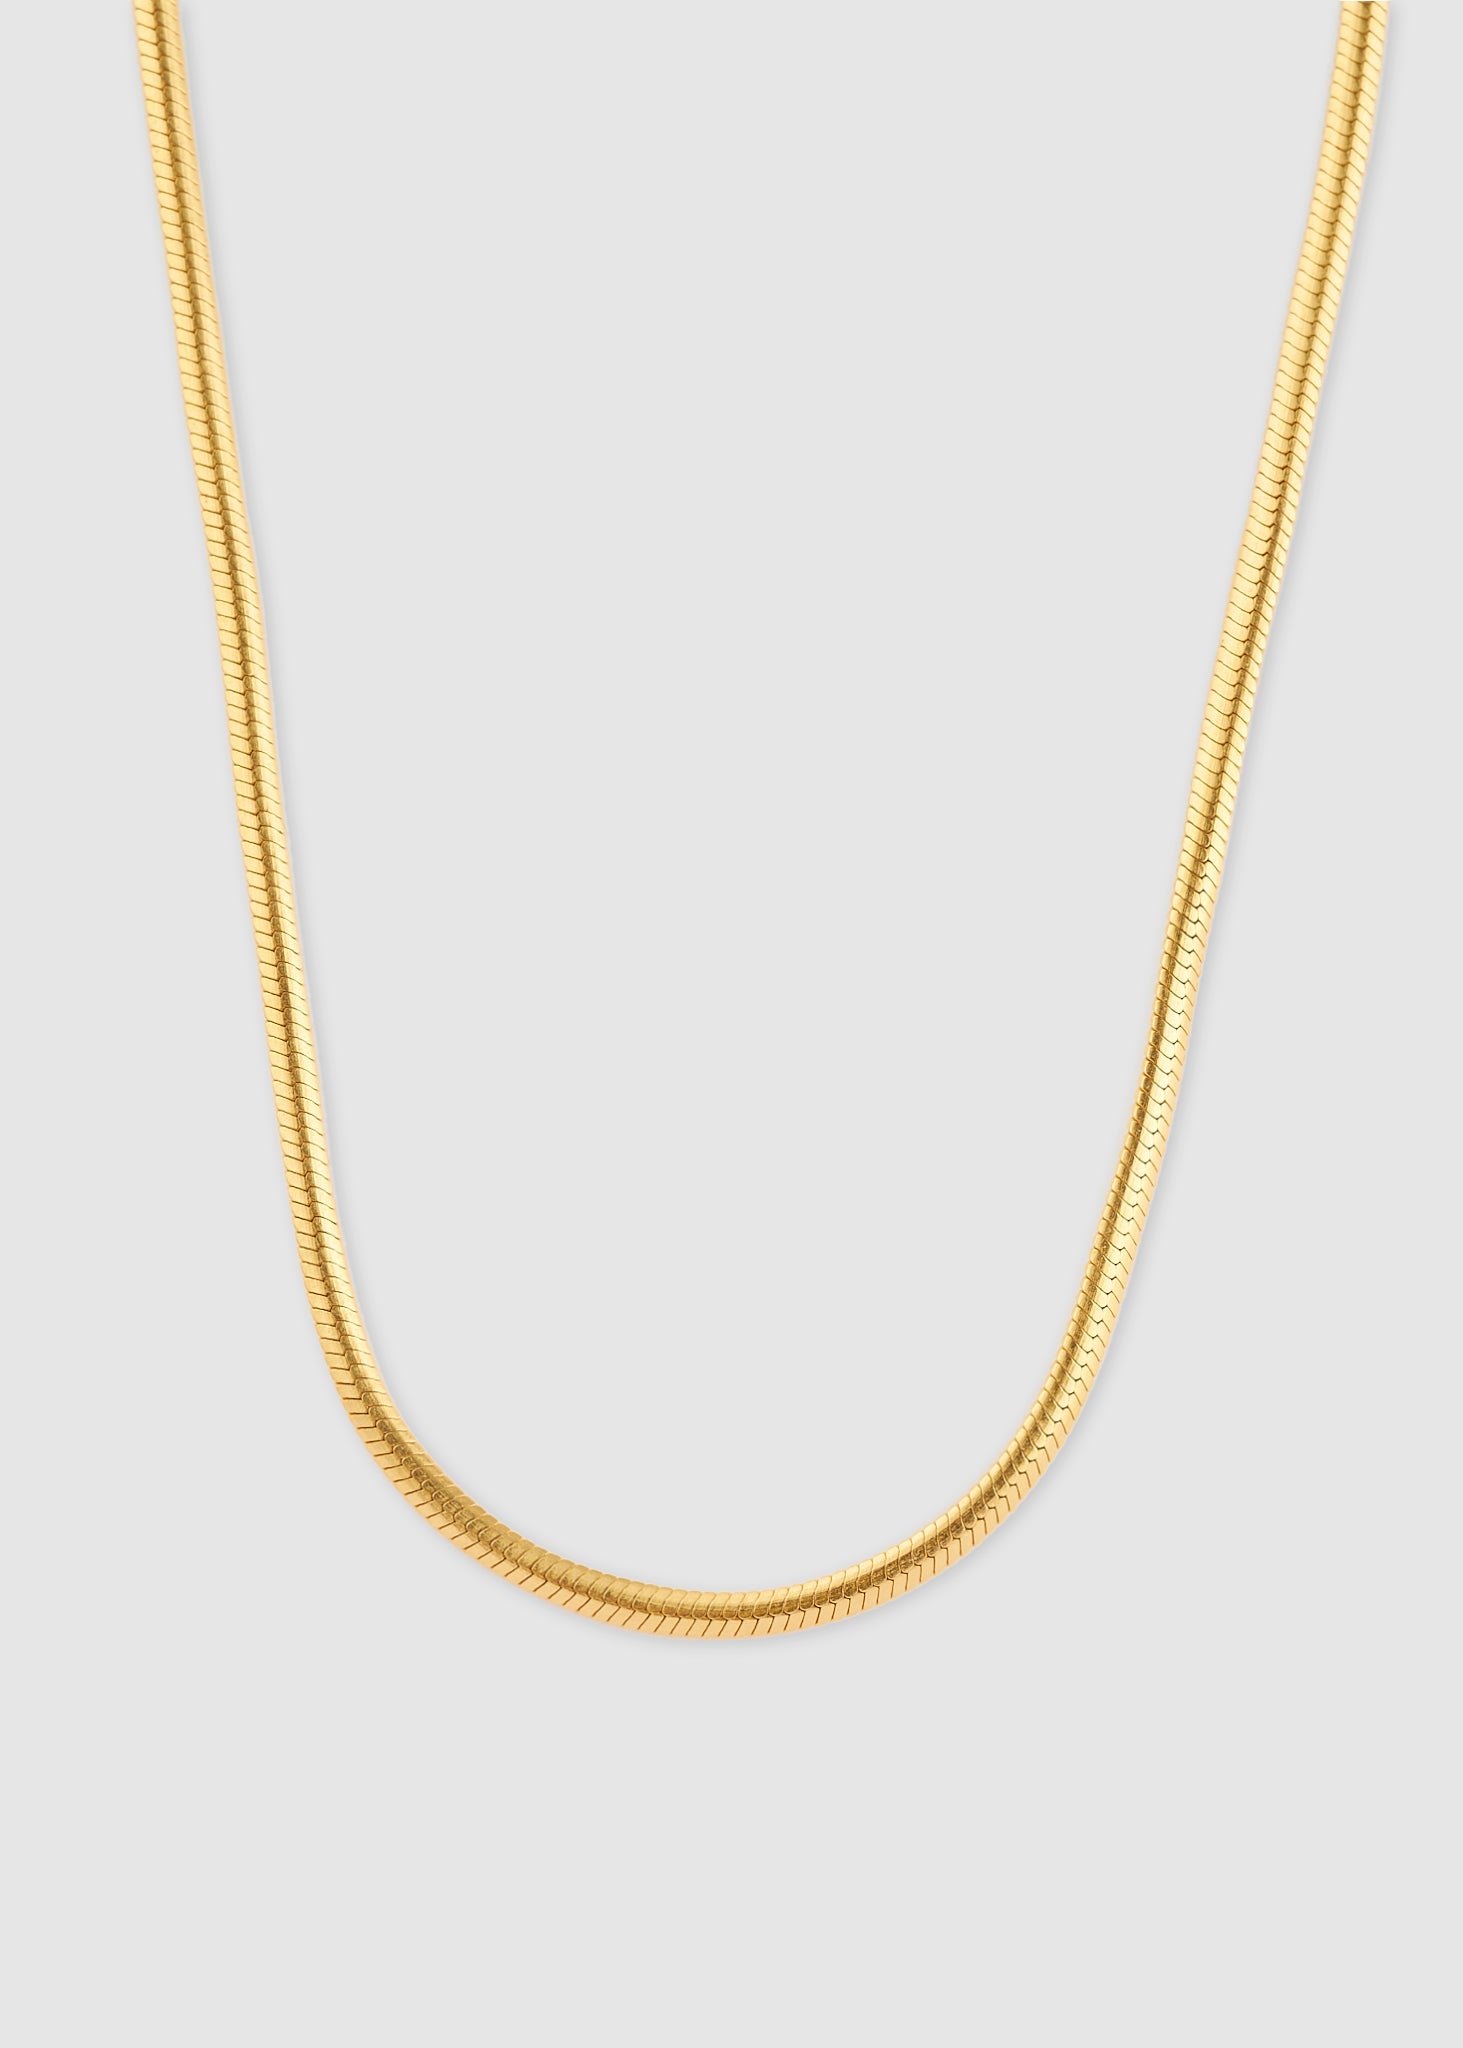 Shyla Womens Thick Snake 22K Gold Plated Silver Necklace